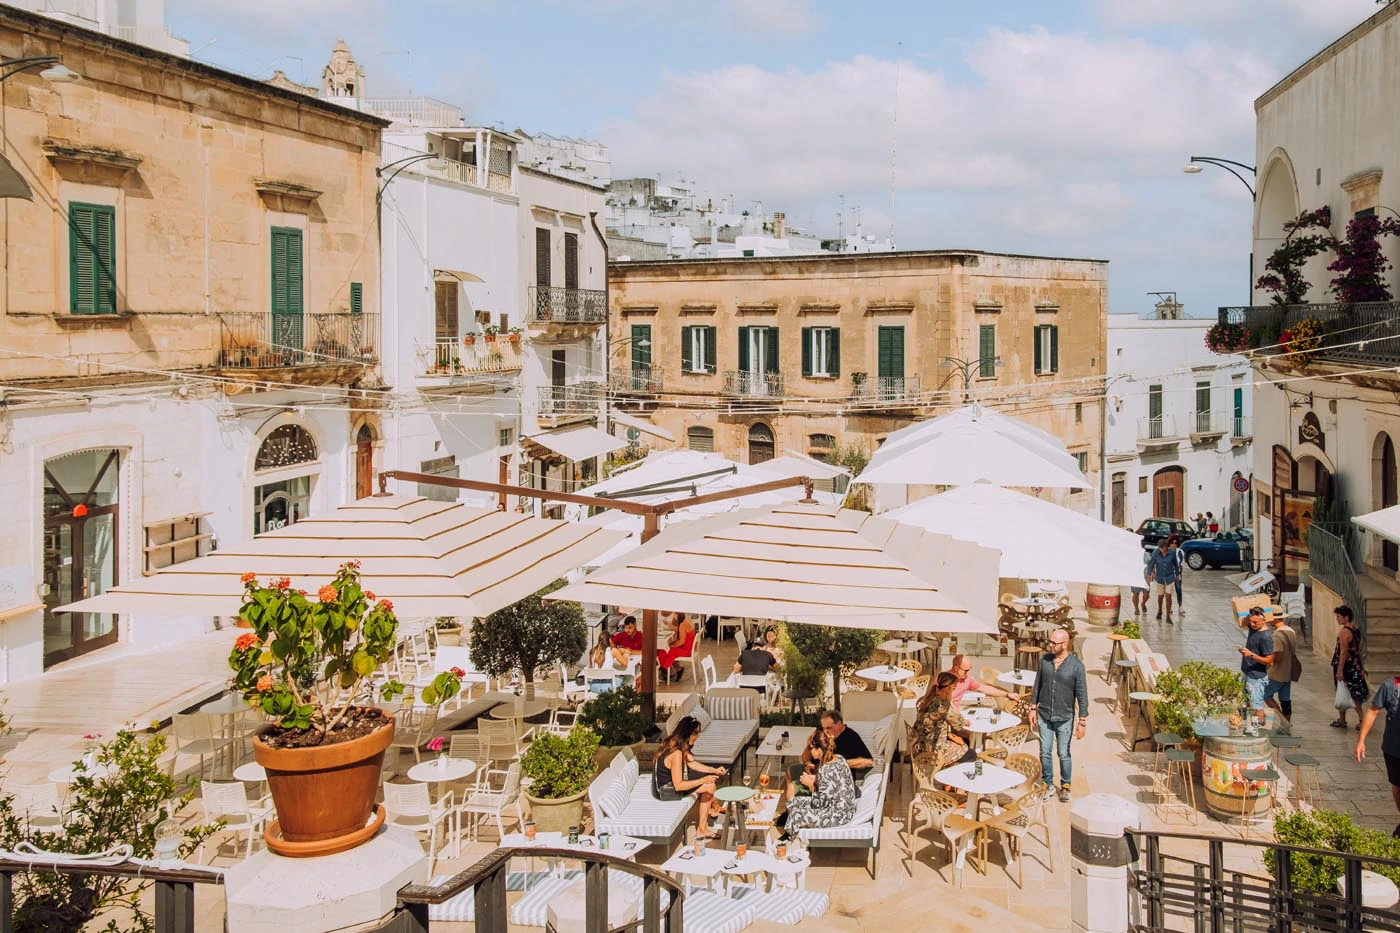 Things to do in Ostuni - Where to eat - Outdoor restaurants